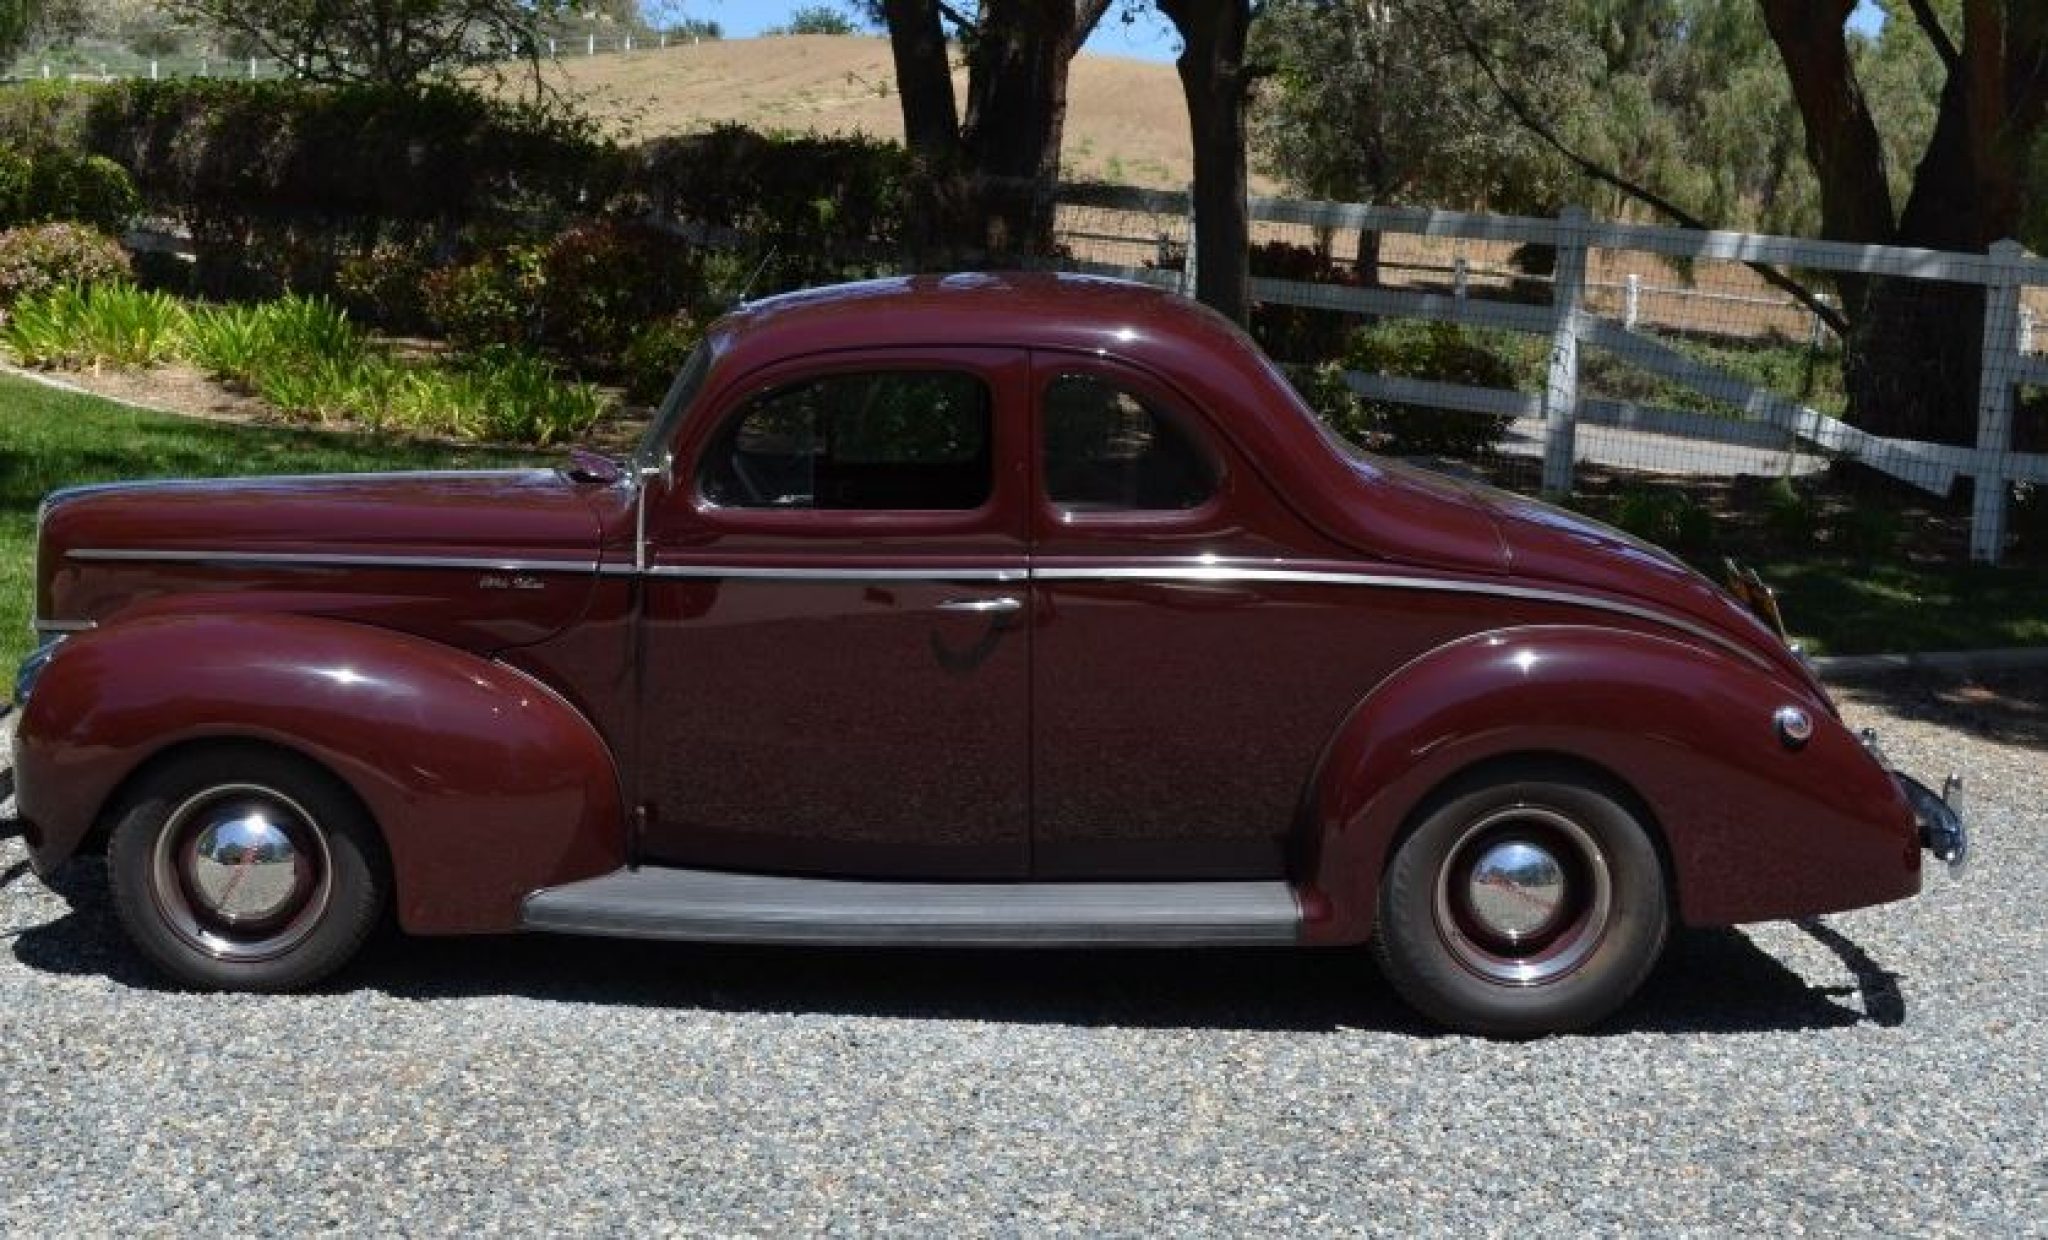 1940 Ford Deluxe Coupe Custom Concours Winner Full Restoration Owner Past 30 Yrs Classic